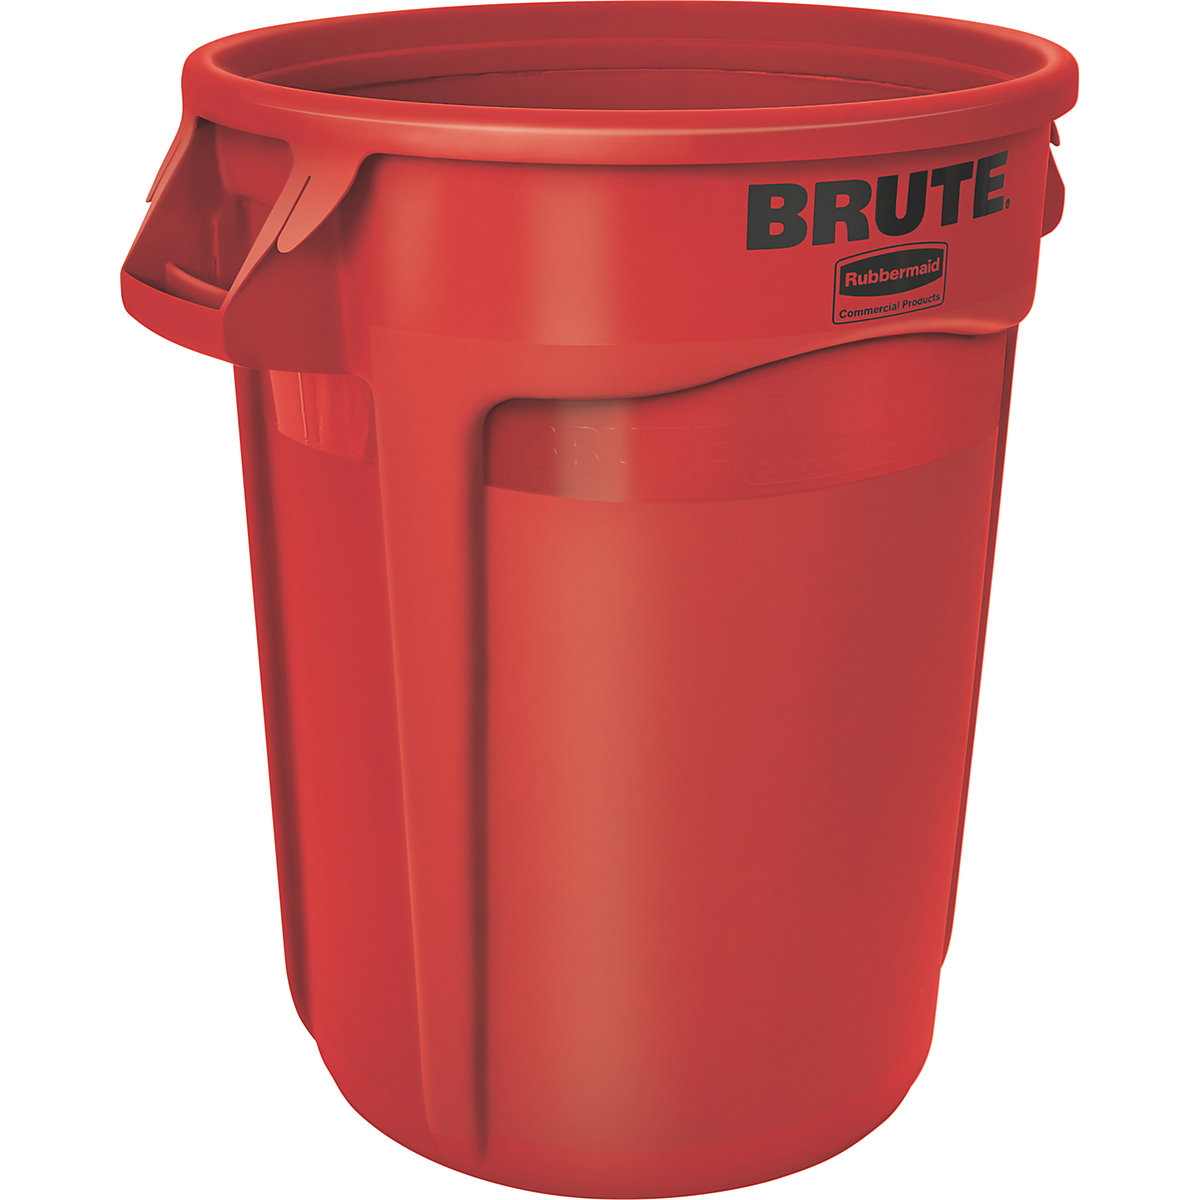 Rubbermaid – BRUTE® universal container/multi purpose container, round, capacity approx. 121 l, red